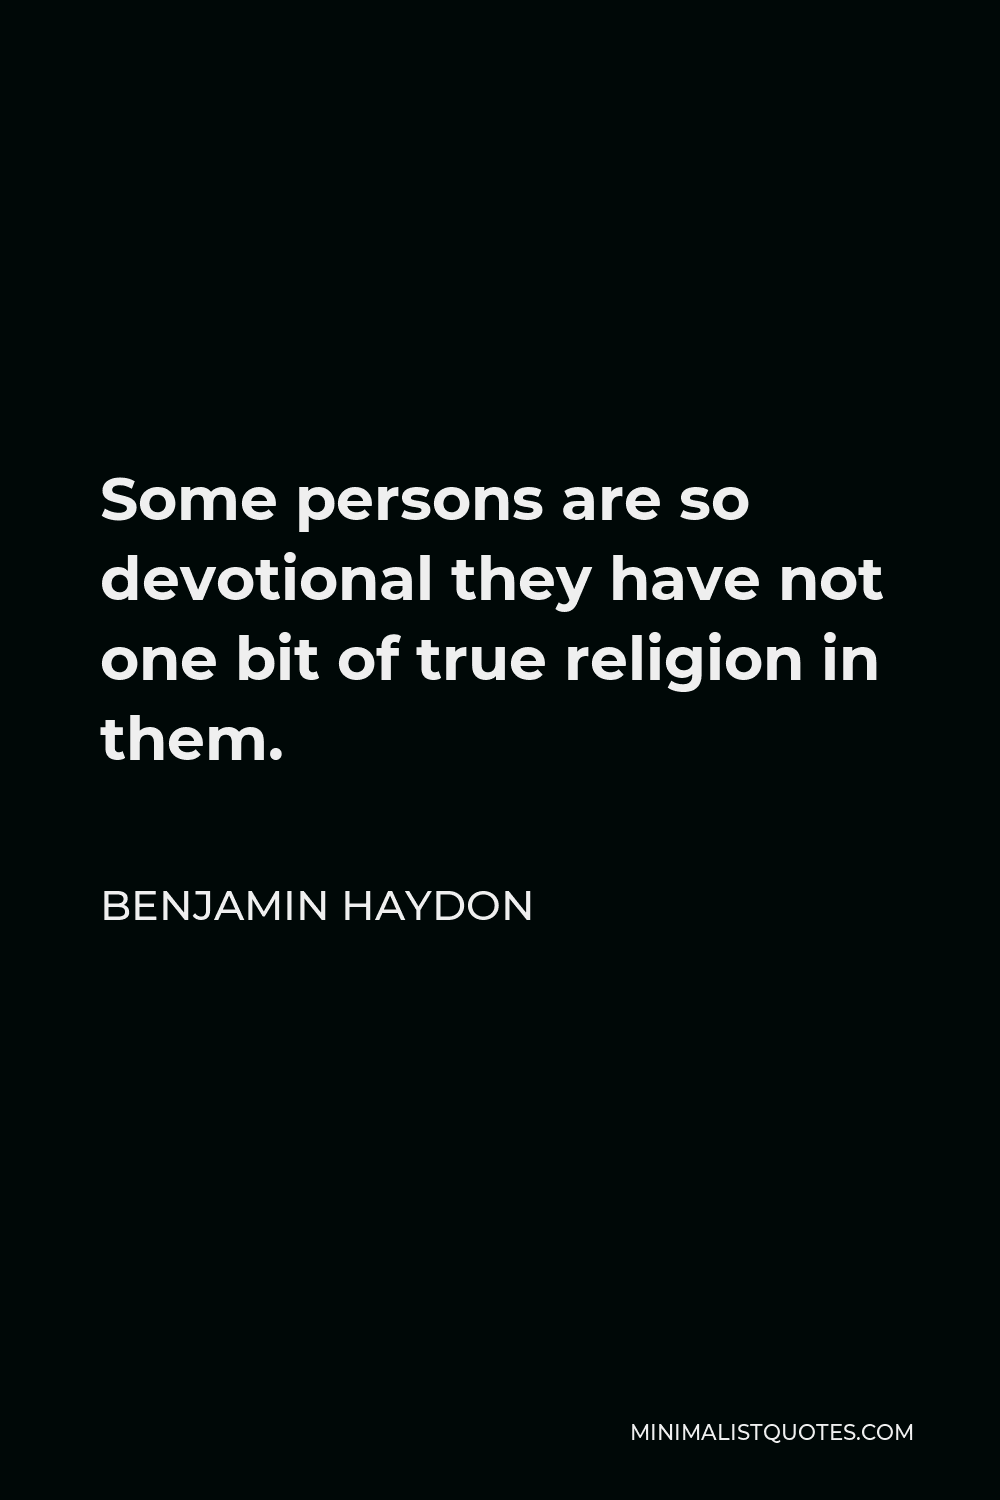 Benjamin Haydon Quote - Some persons are so devotional they have not one bit of true religion in them.